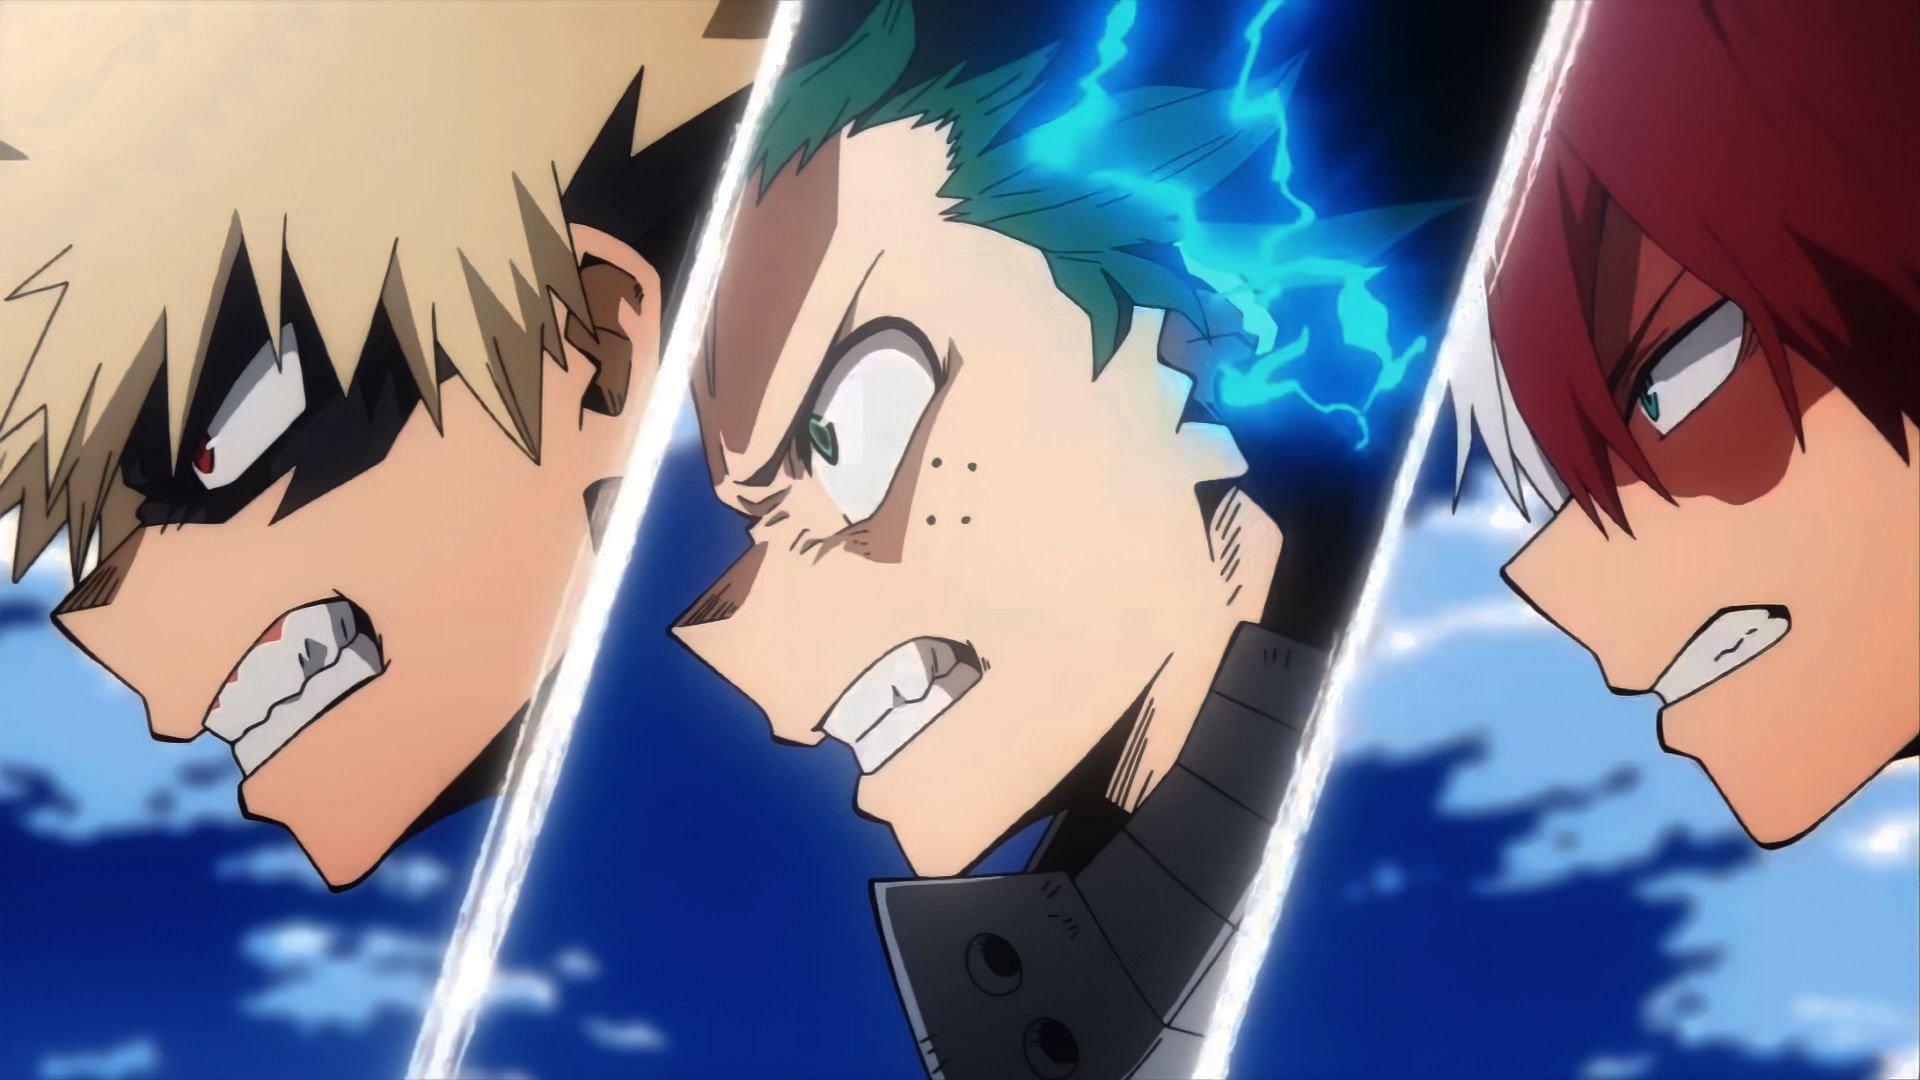 Anime Corner - JUST IN: My Hero Academia 6 - Second Cour Opening